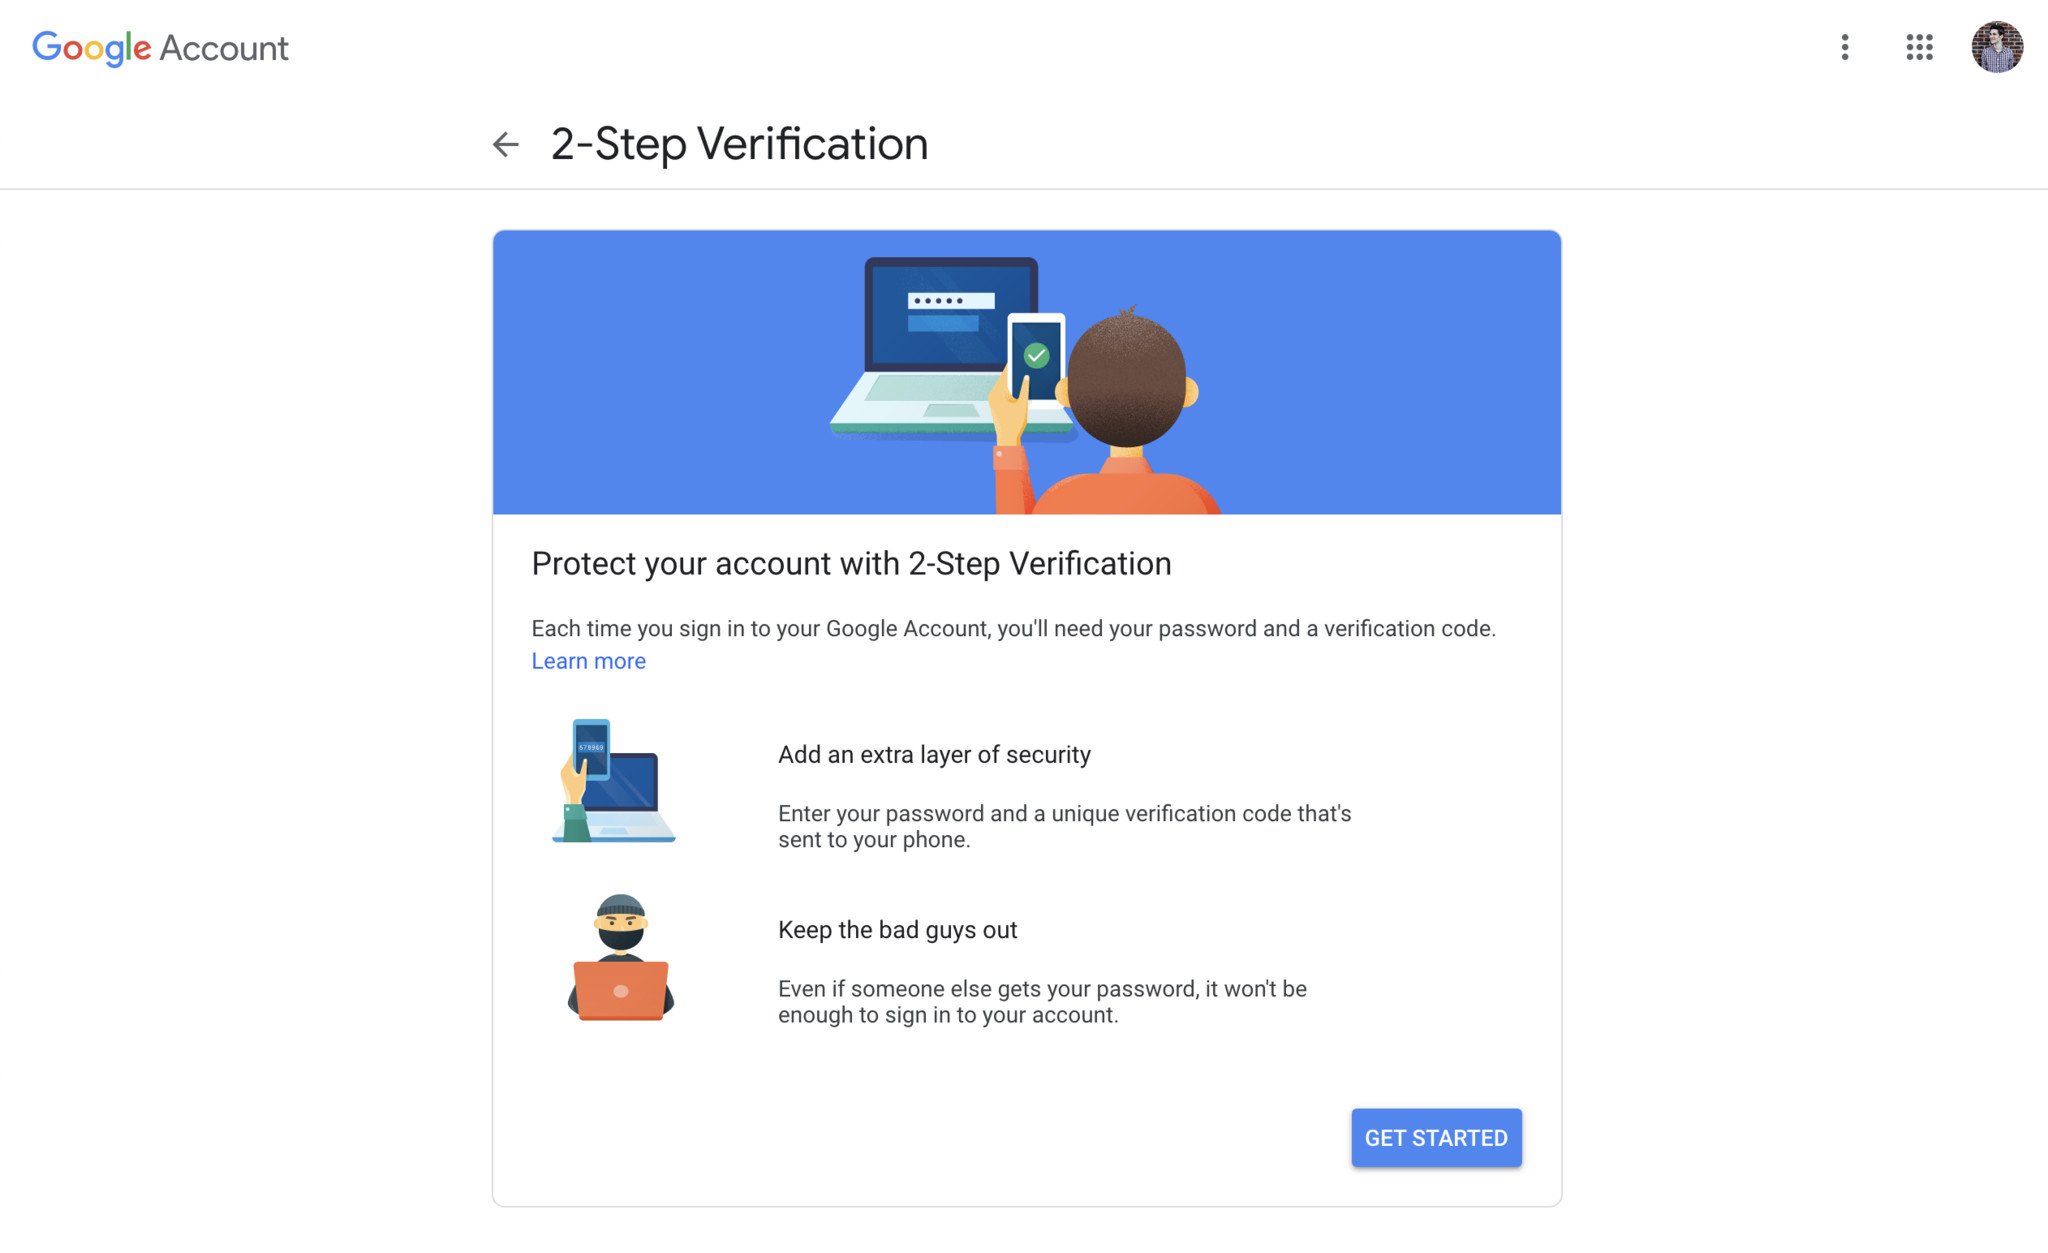 Setting up two-factor authentication on a Google account